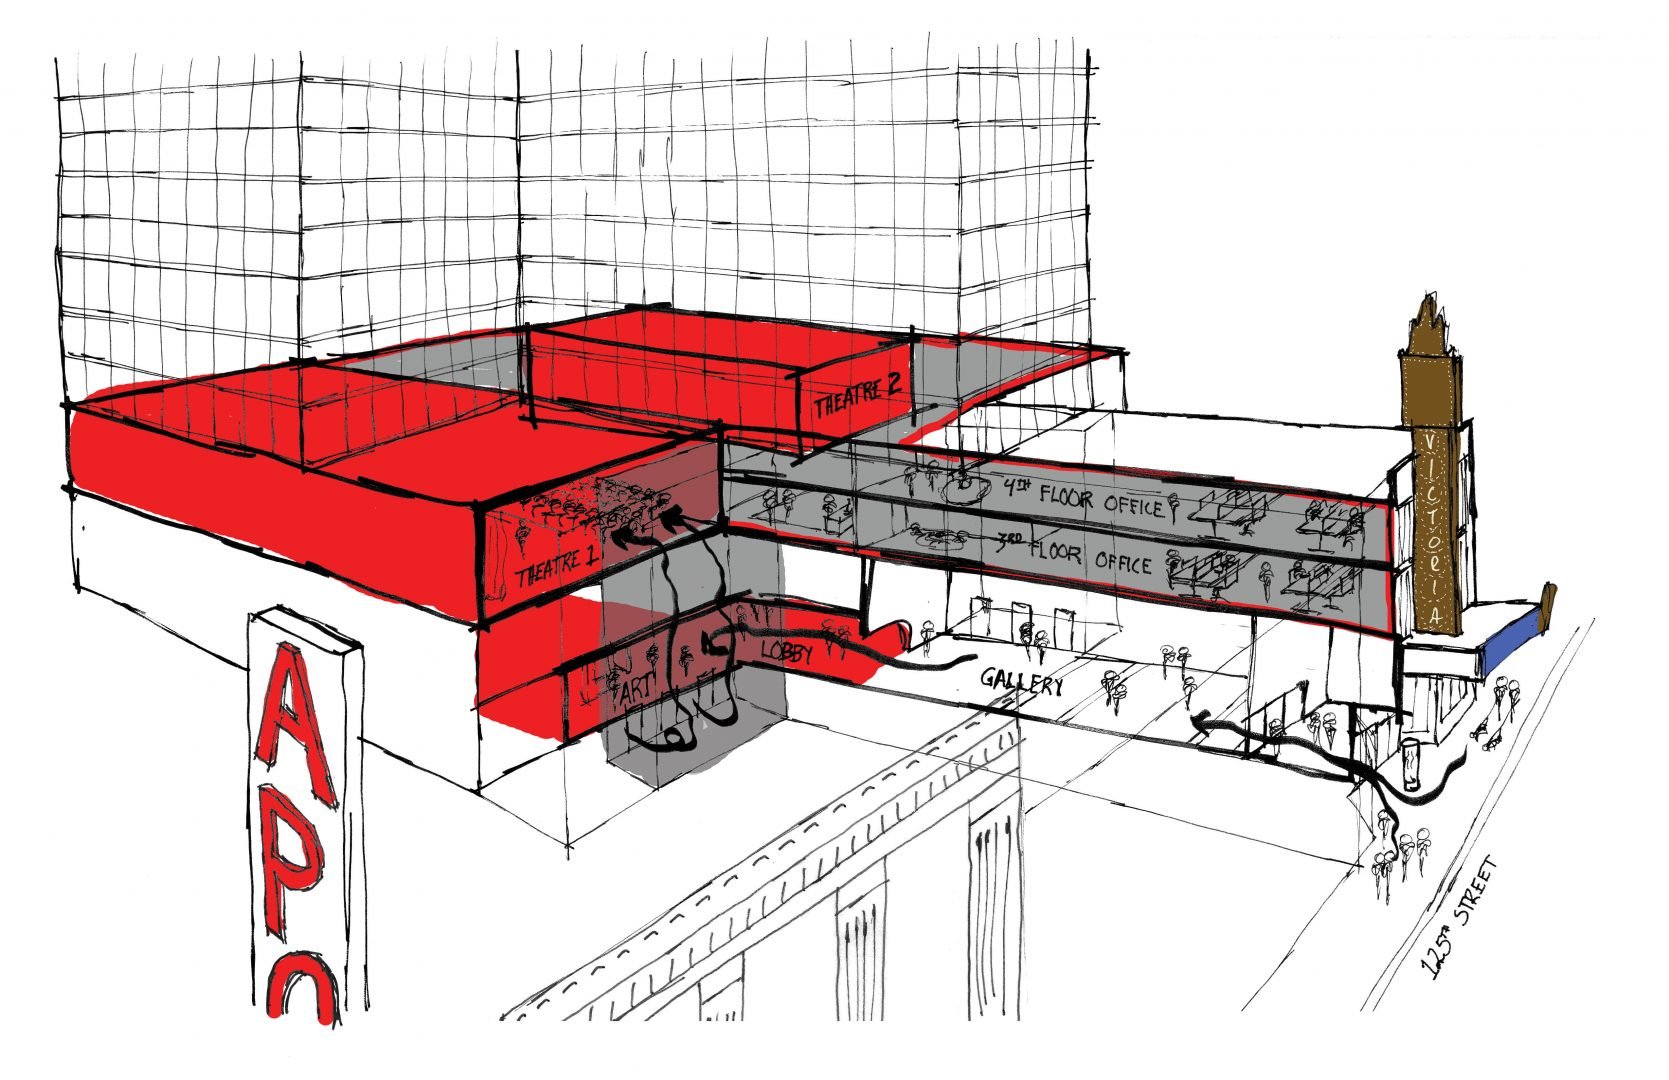 A rough sketch of the new Victoria Theater